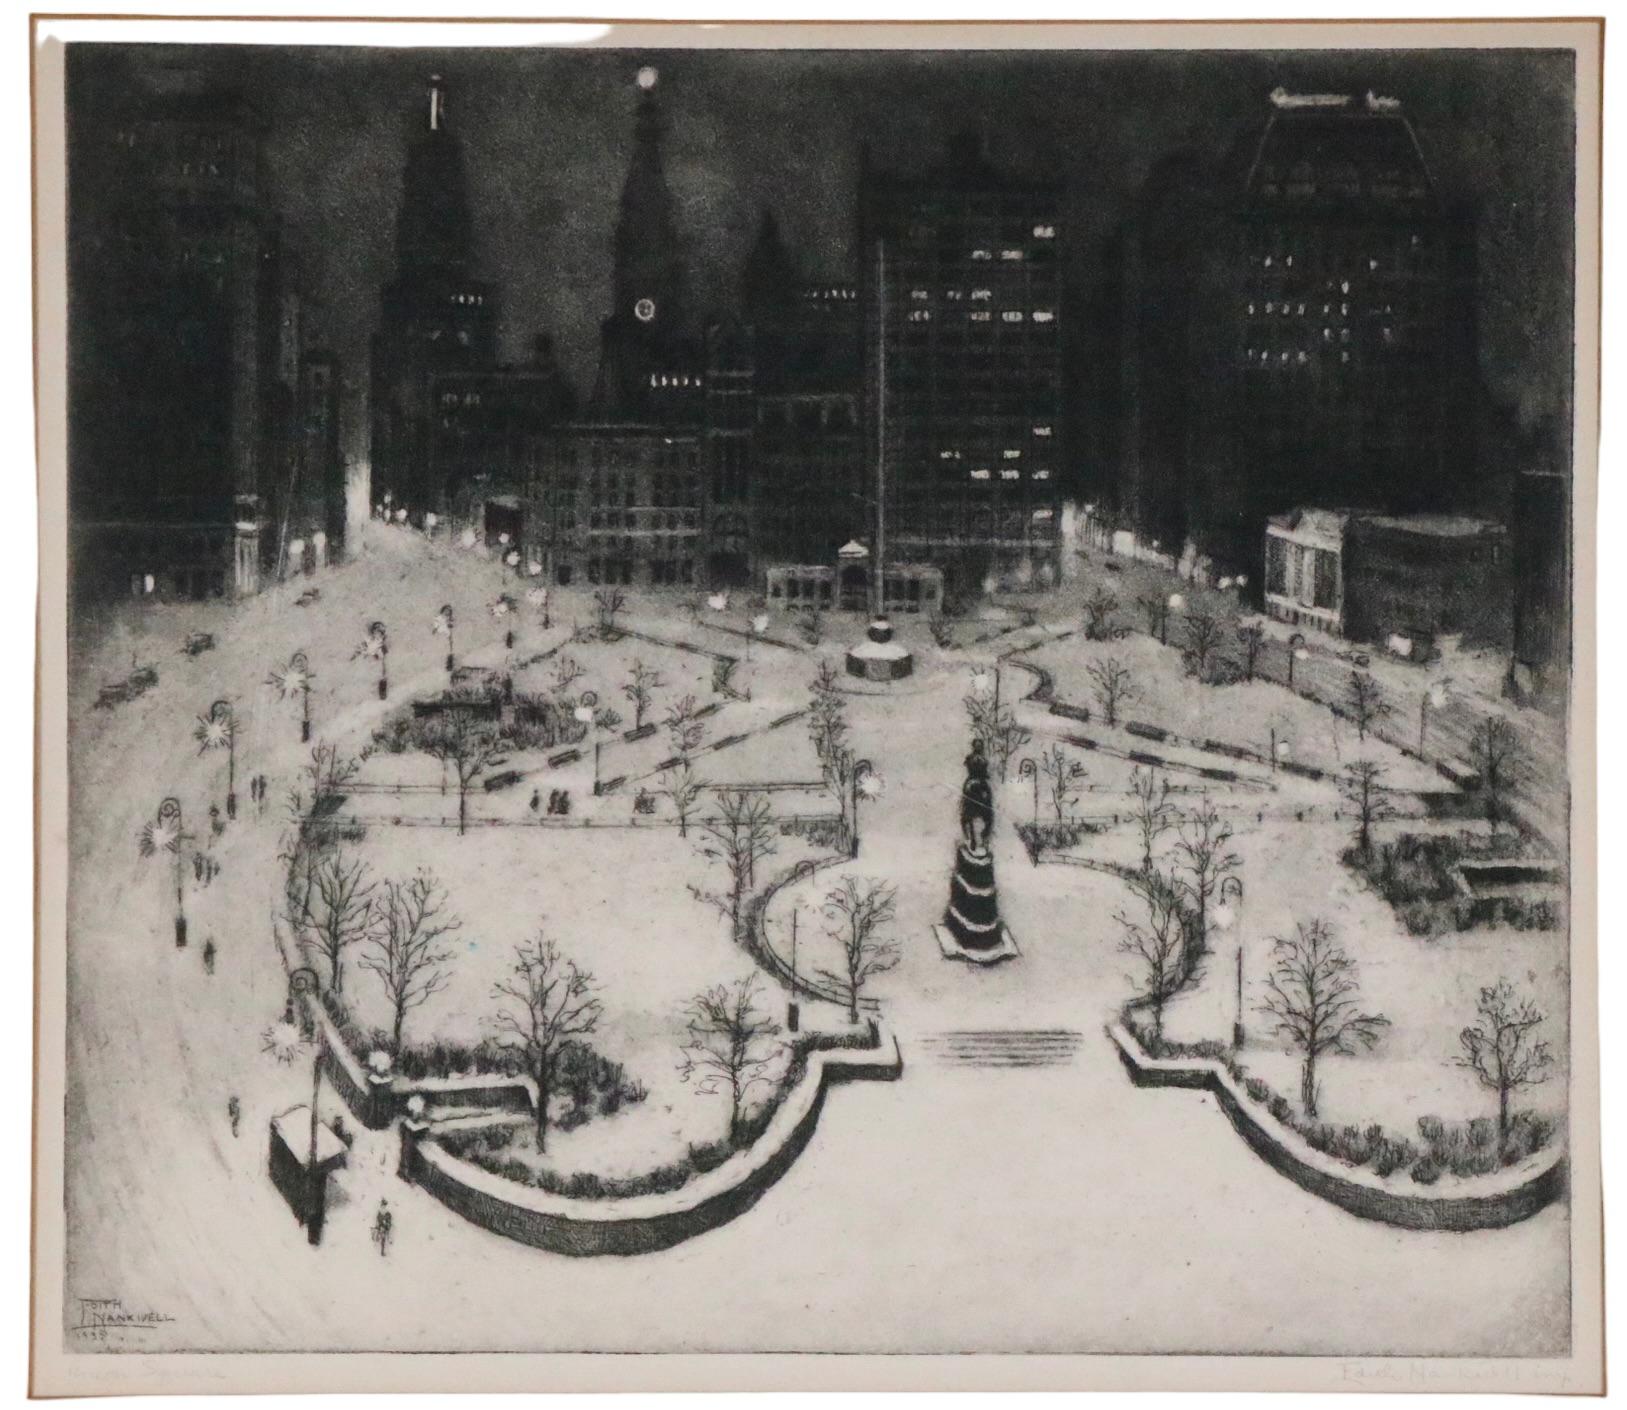 Period Art Deco aquatint etching by noted printmaker, artist Edith Nankivell, pencil signed, limited edition titled Union Square. The view is looking north from the south side of Union Square park, New York City, in winter. The print is in very